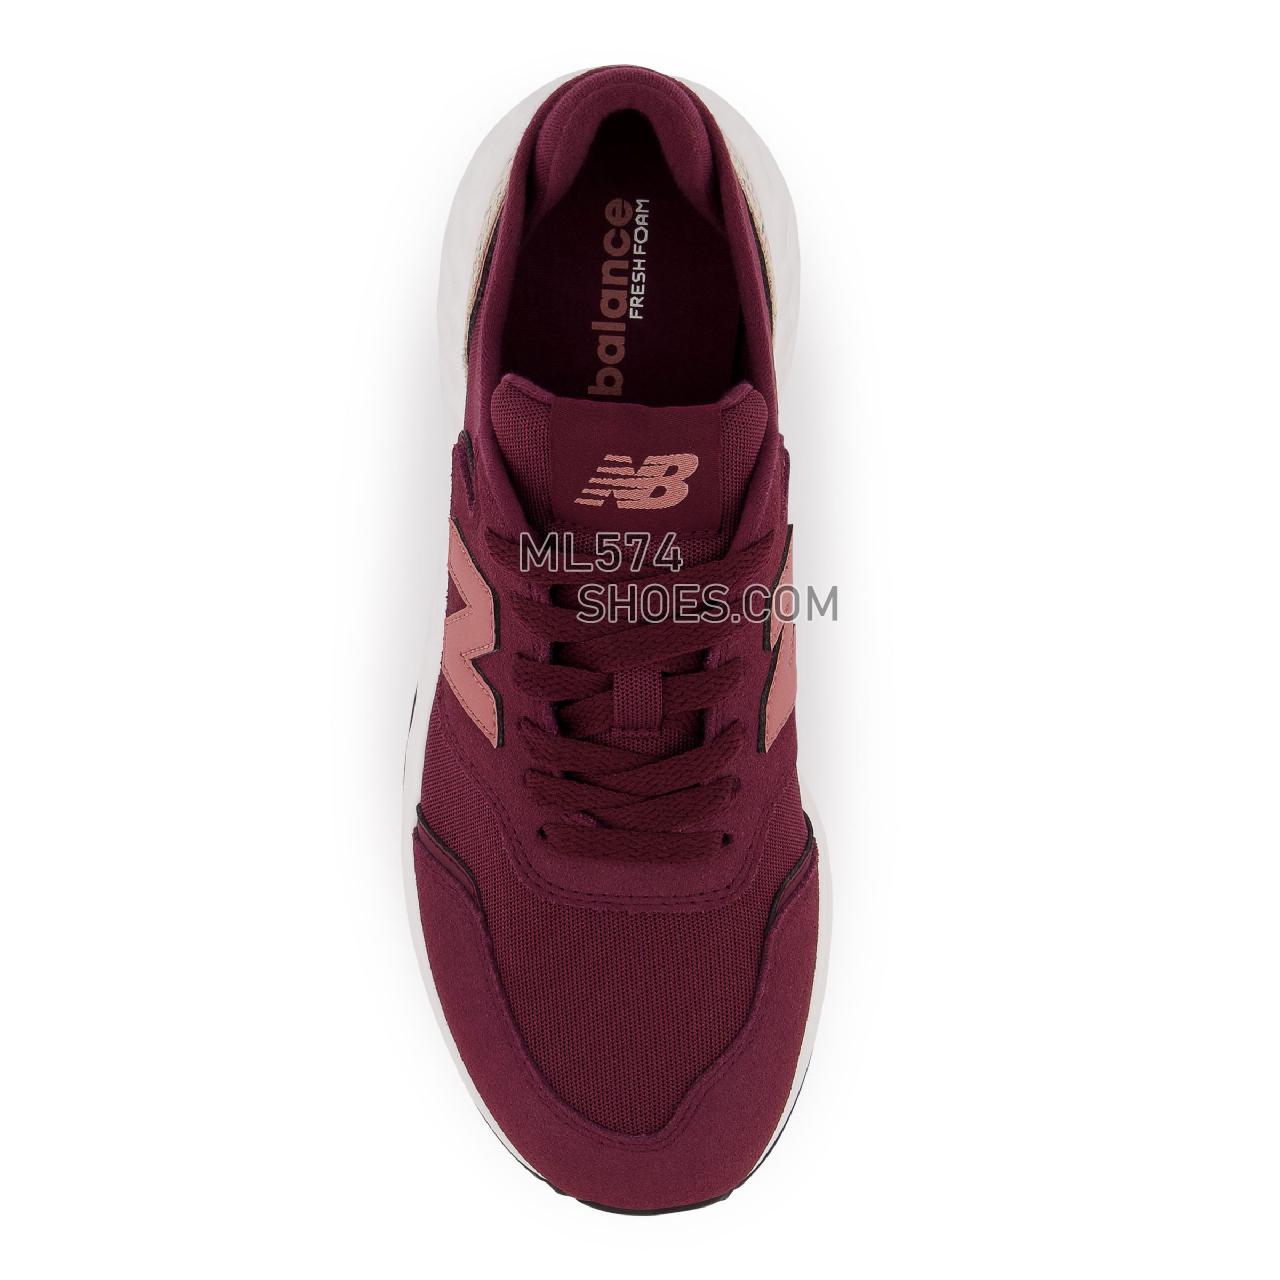 New Balance Fresh Foam X70 - Women's Sport Style Sneakers - Nb Burgundy with Washed Henna and White - WSX70BH1